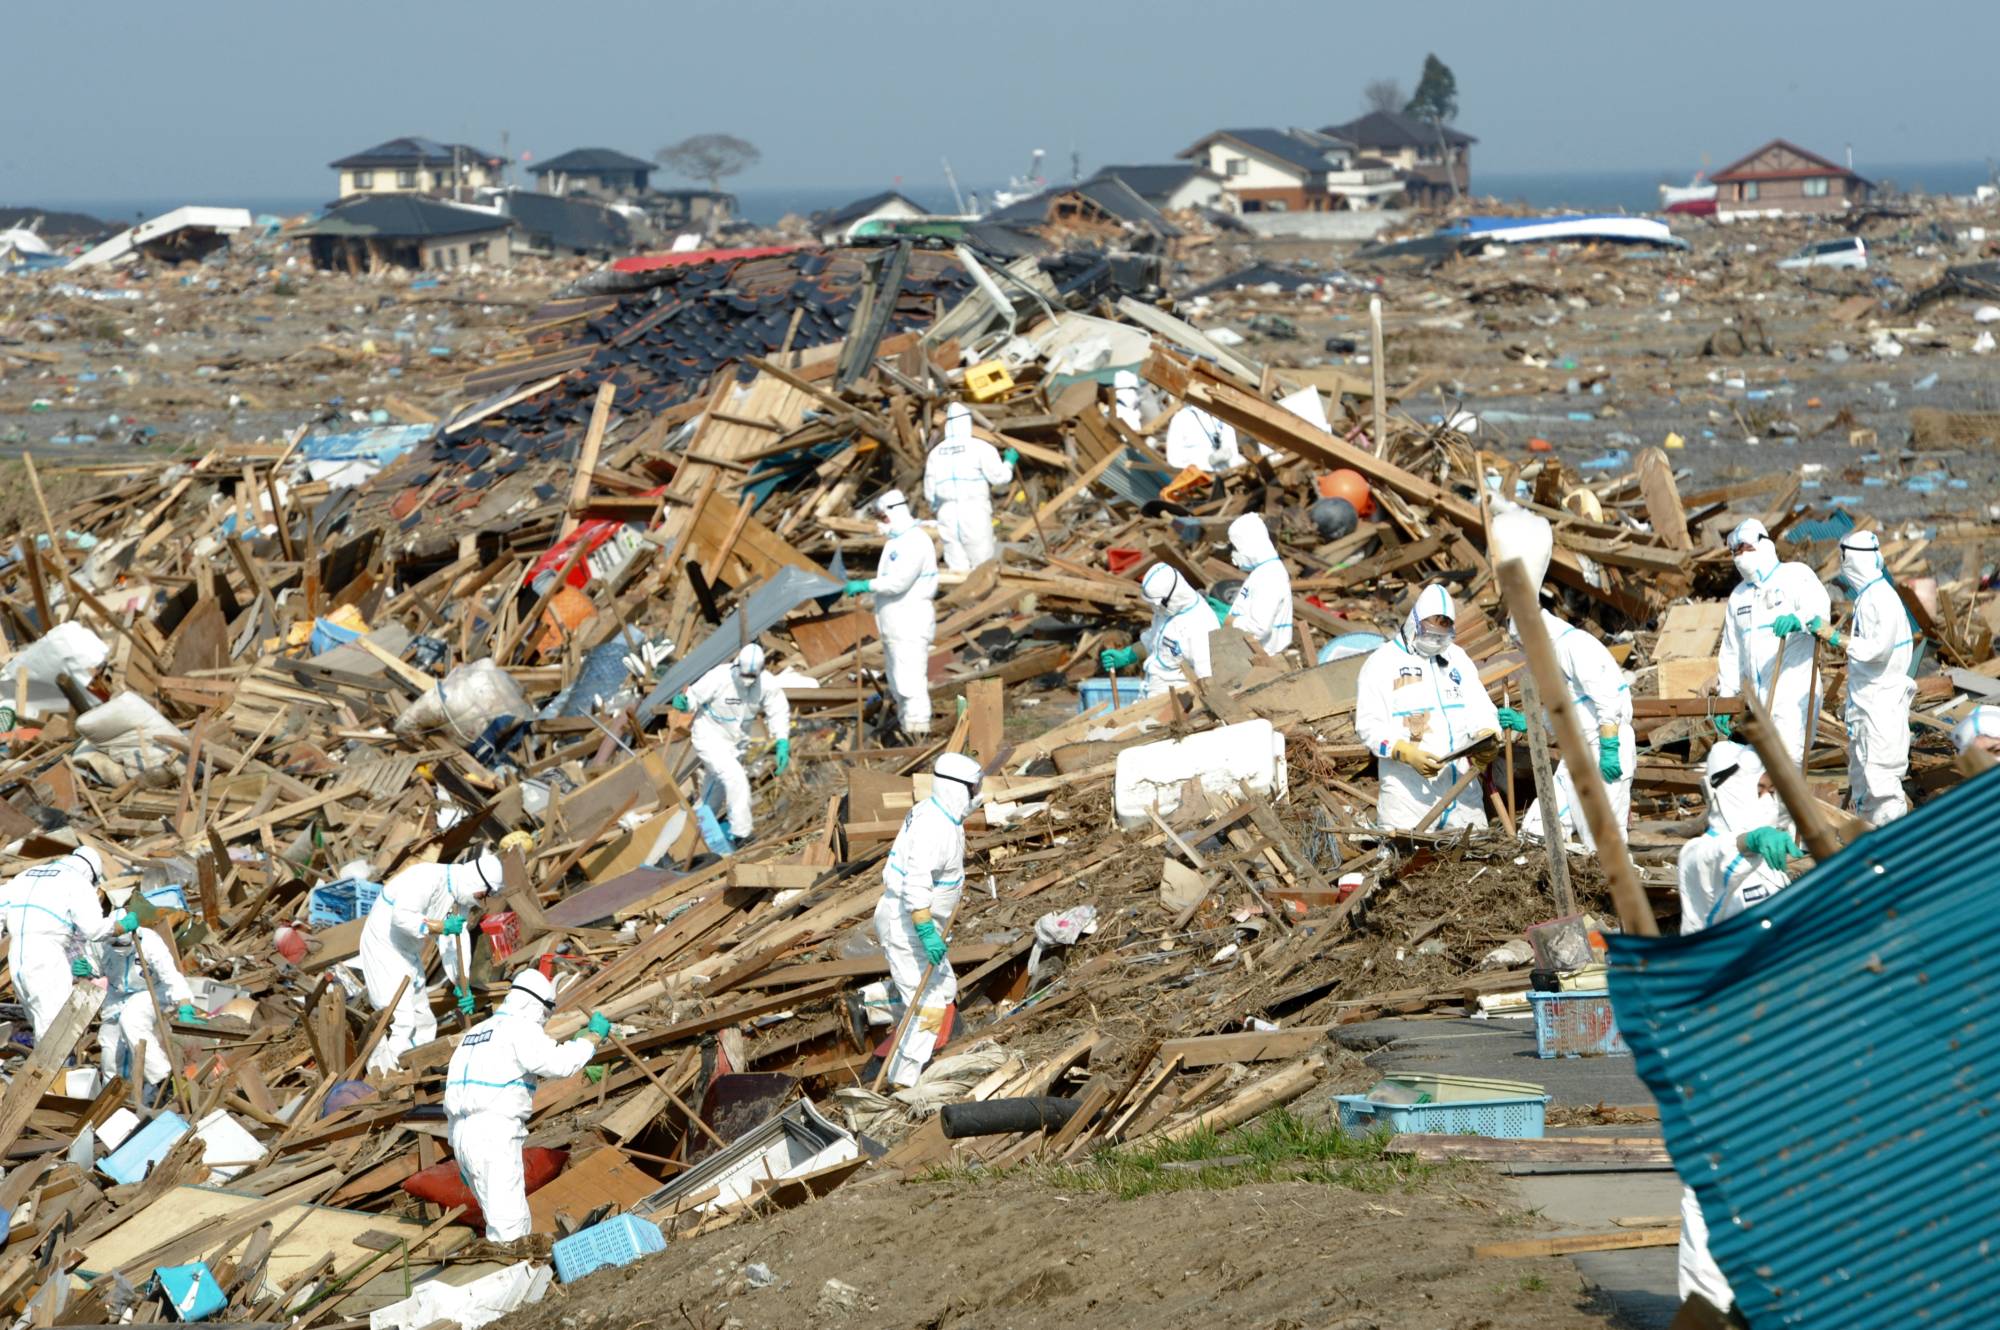 Disaster response workers search for missing people in the Ukedo district of the town of Namie, Fukushima Prefecture, on April 14, 2011. That day, they found 10 bodies. | TADAO FURUKAWA / COURTESY OF FUKUSHIMA MINPO